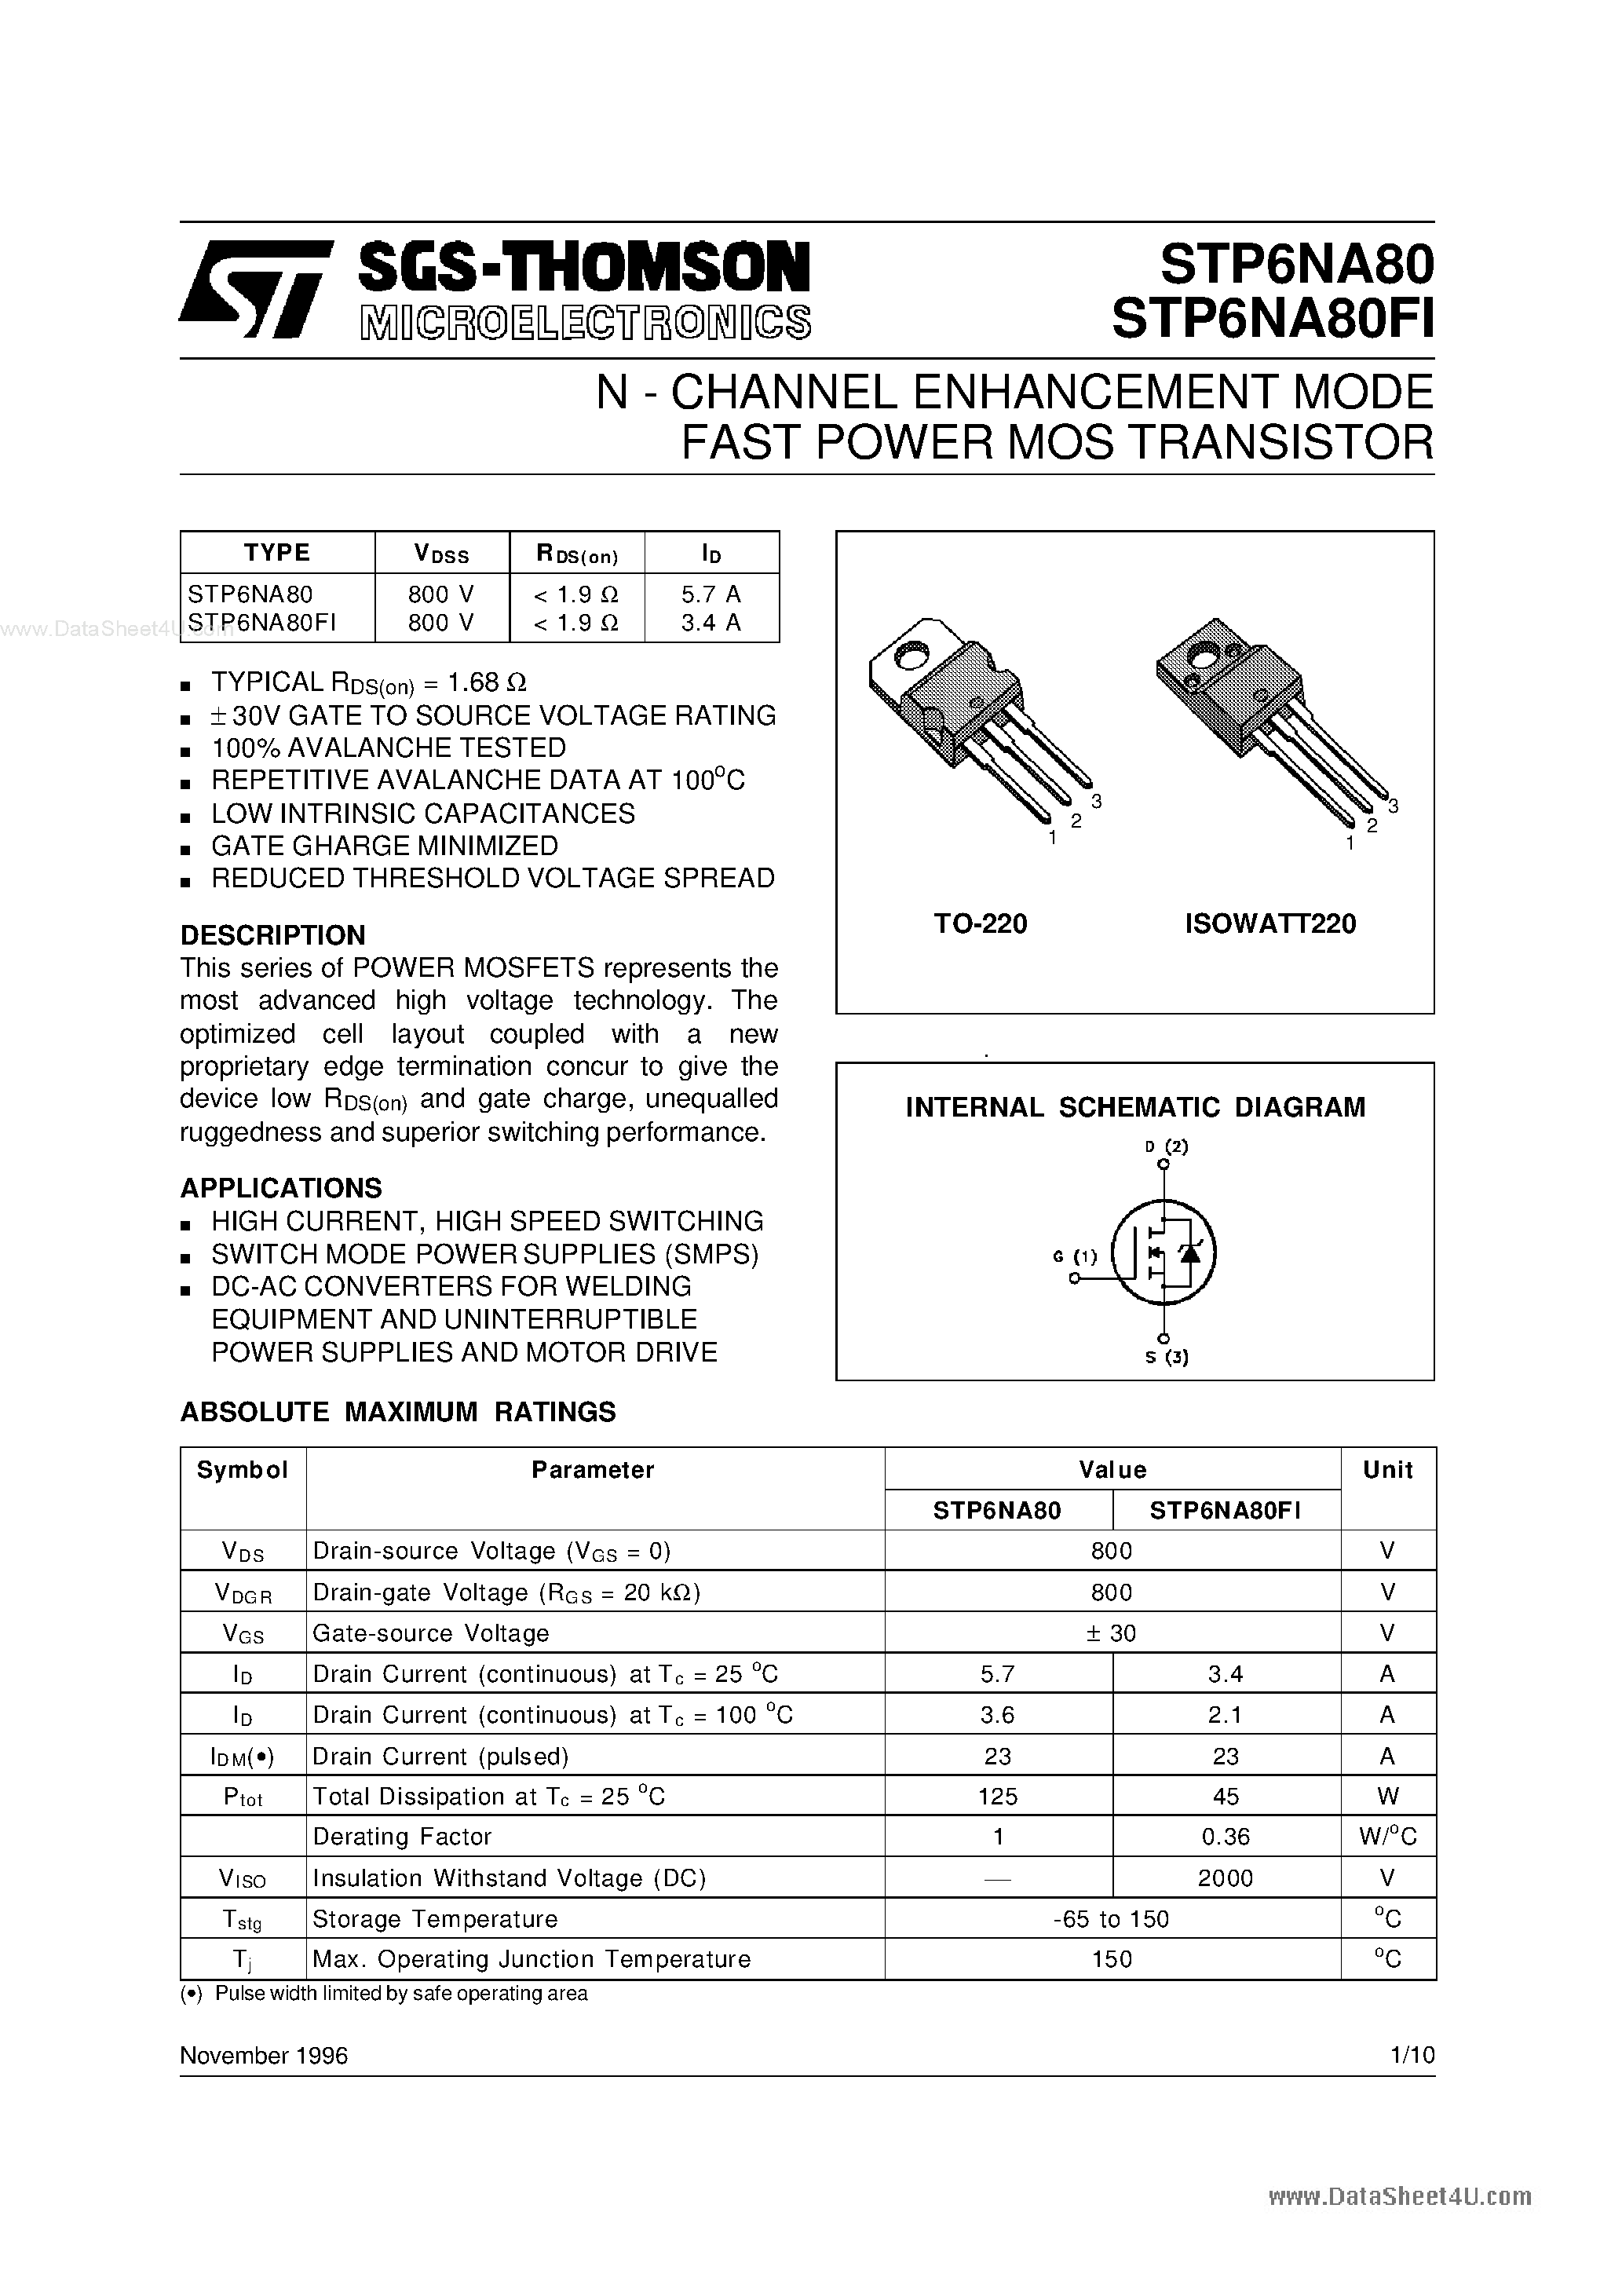 Datasheet STP6NA80 - N-CHANNEL ENHANCEMENT MODE FAST POWER MOS TRANSISTOR page 1